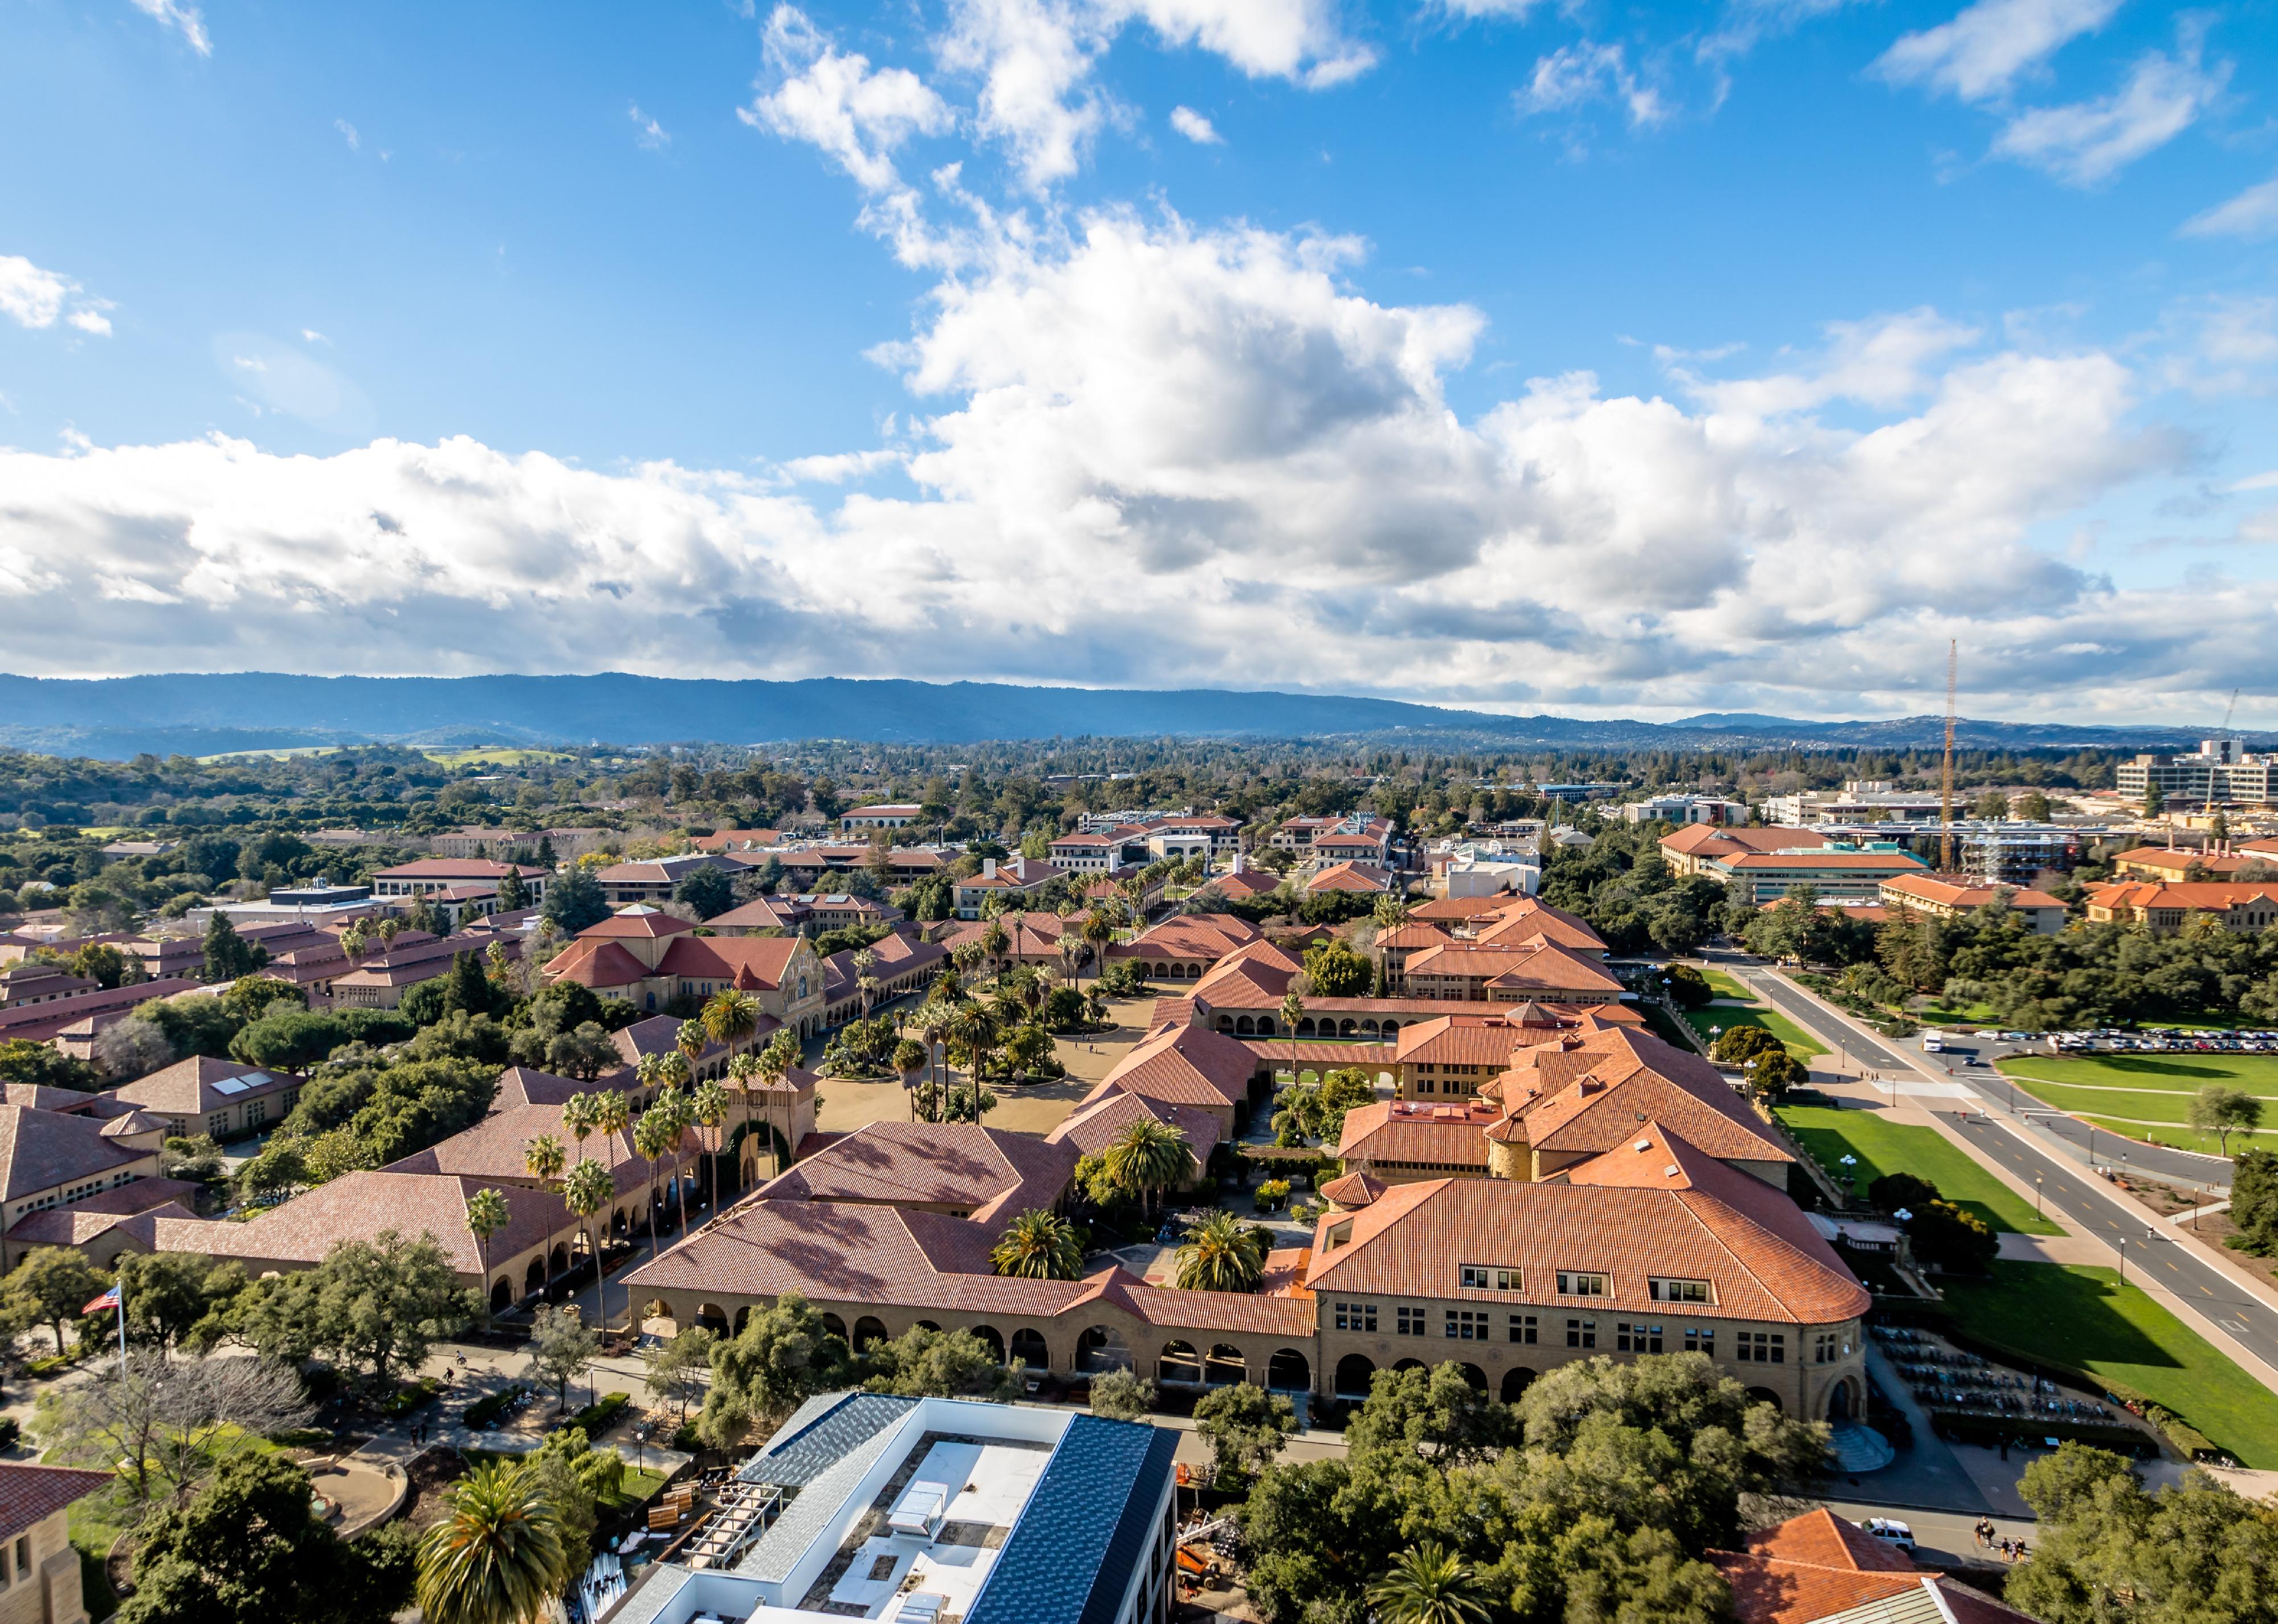 Aerial view of Stanford University Campus